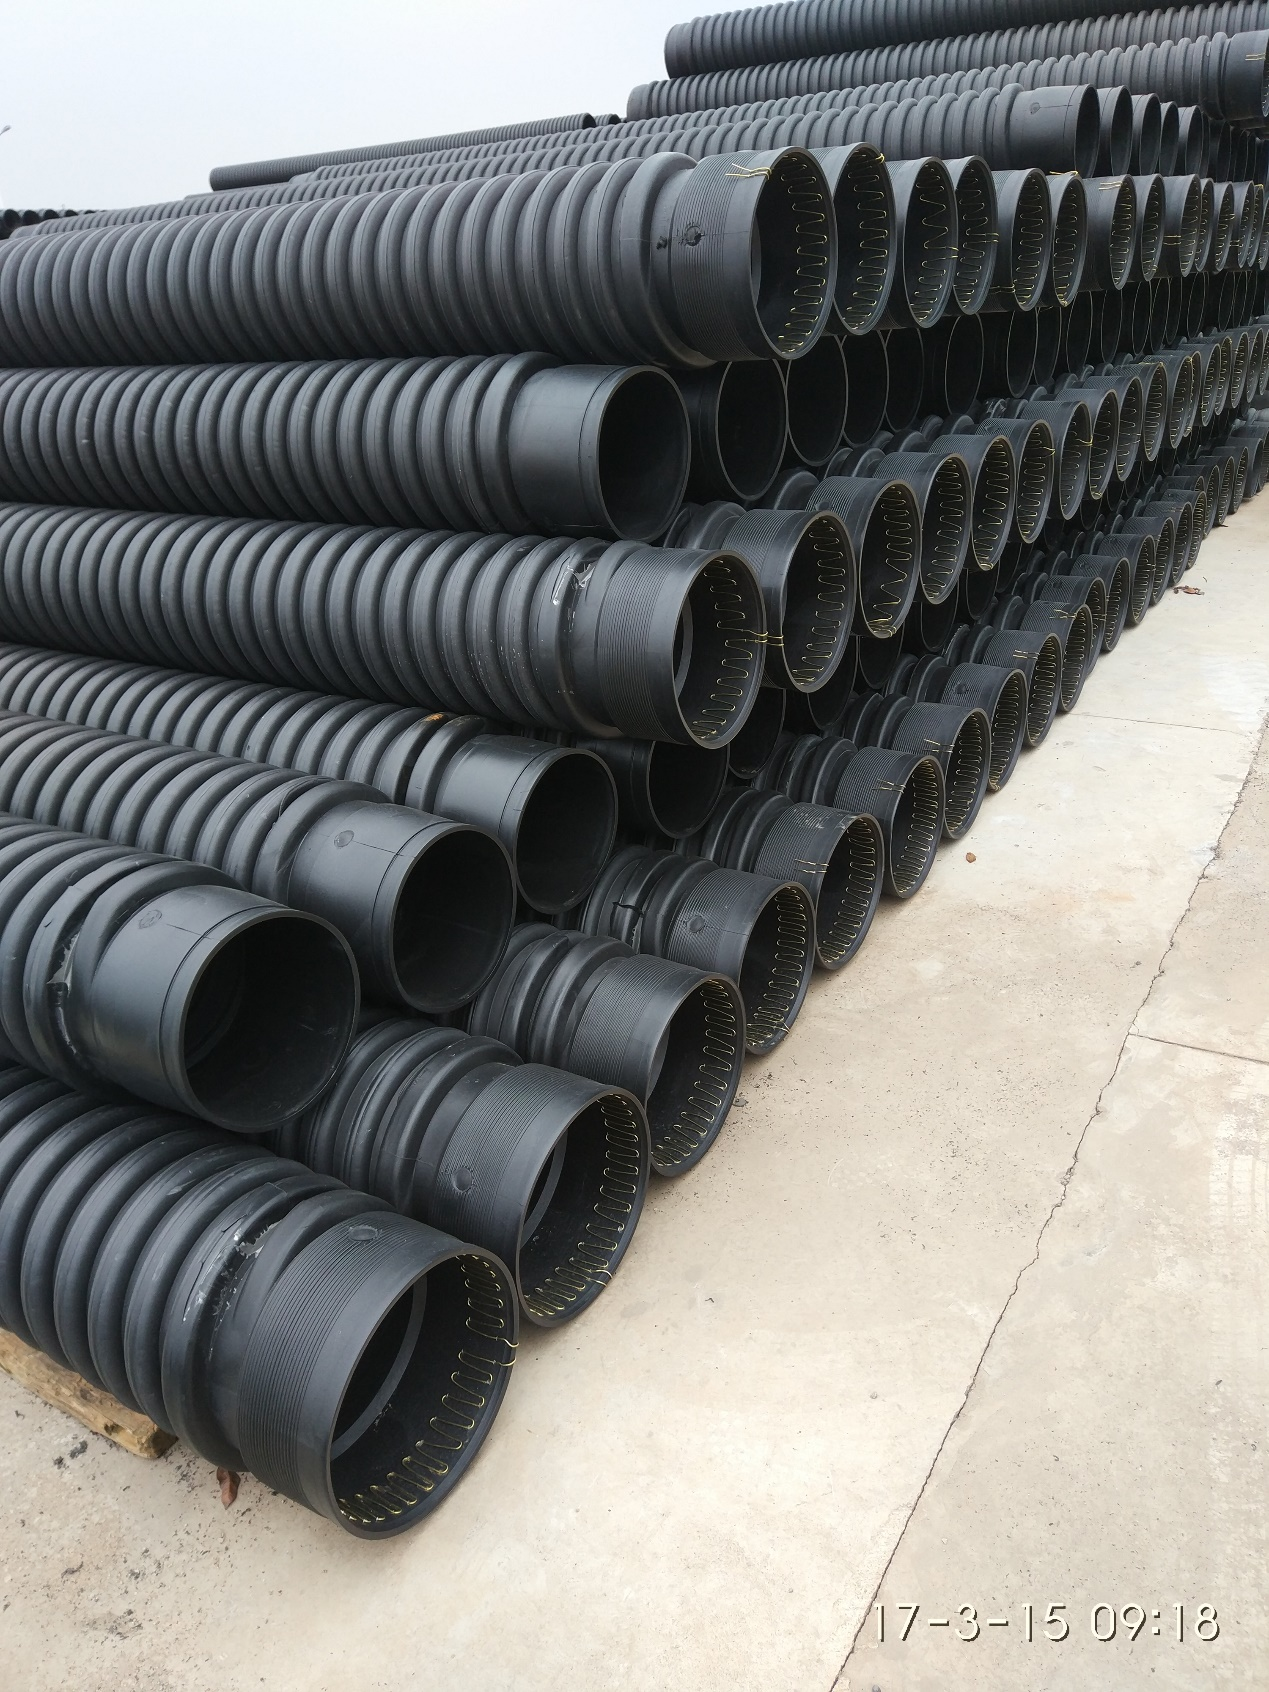 HDPE spiral pipe4